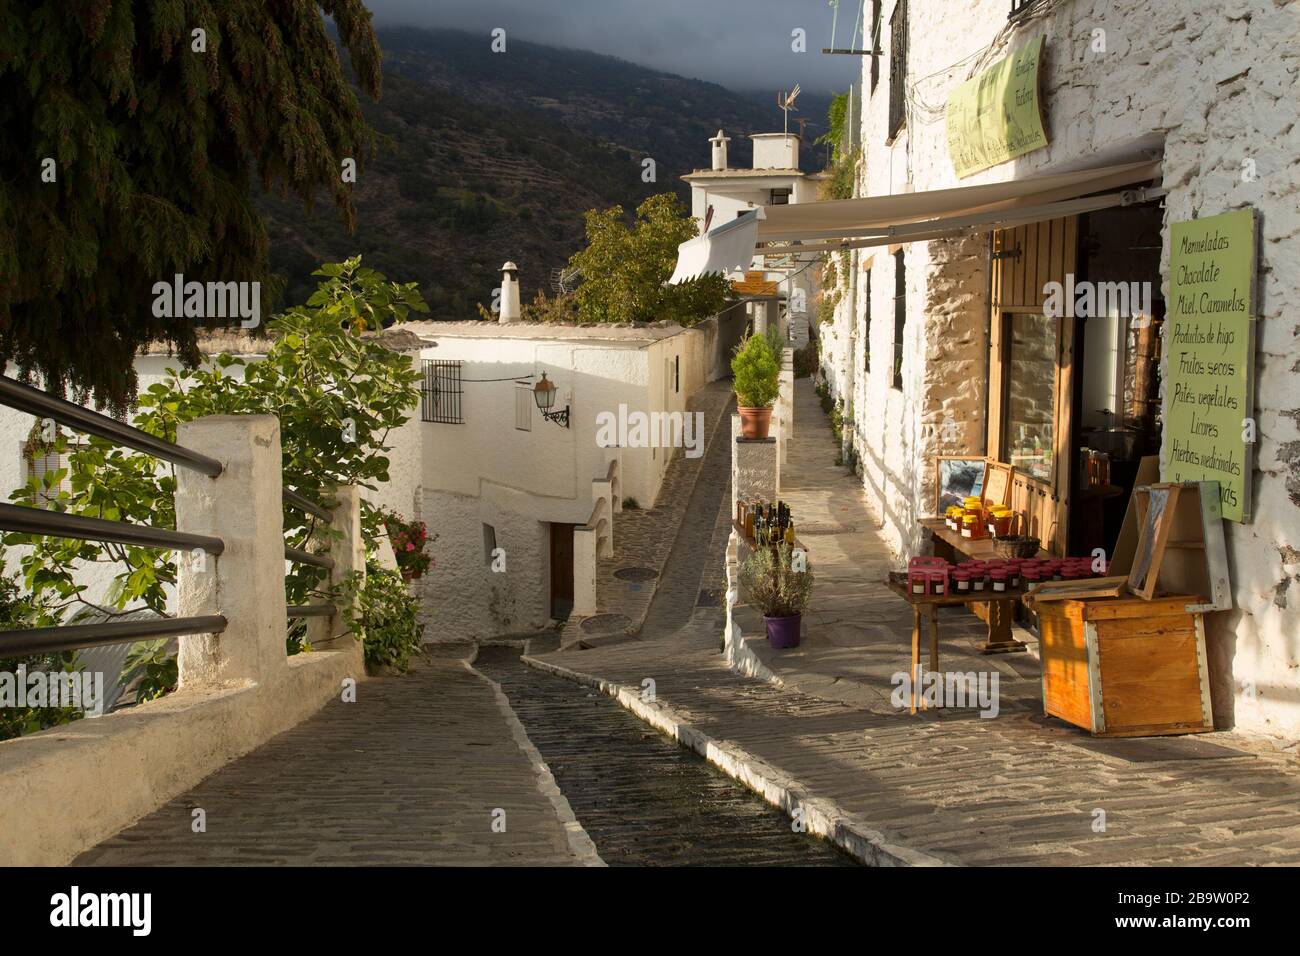 A steep street with an acequia water channel and artisan food shop in the village of Pampaneira, Alpujarra, Granada, Andalusia, Spain Stock Photo